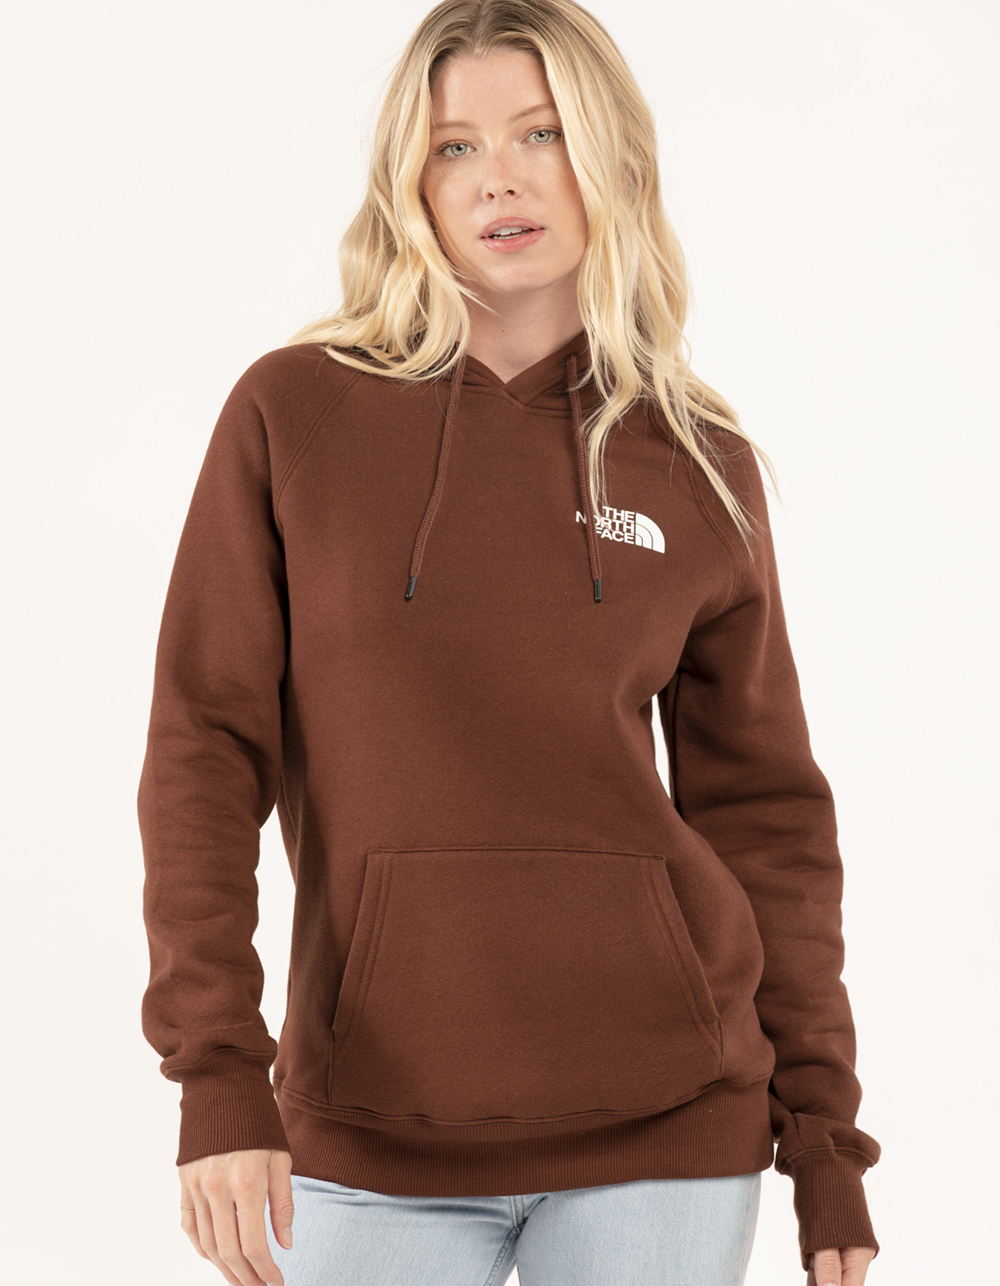 THE NORTH FACE NSE Box Womens Hoodie